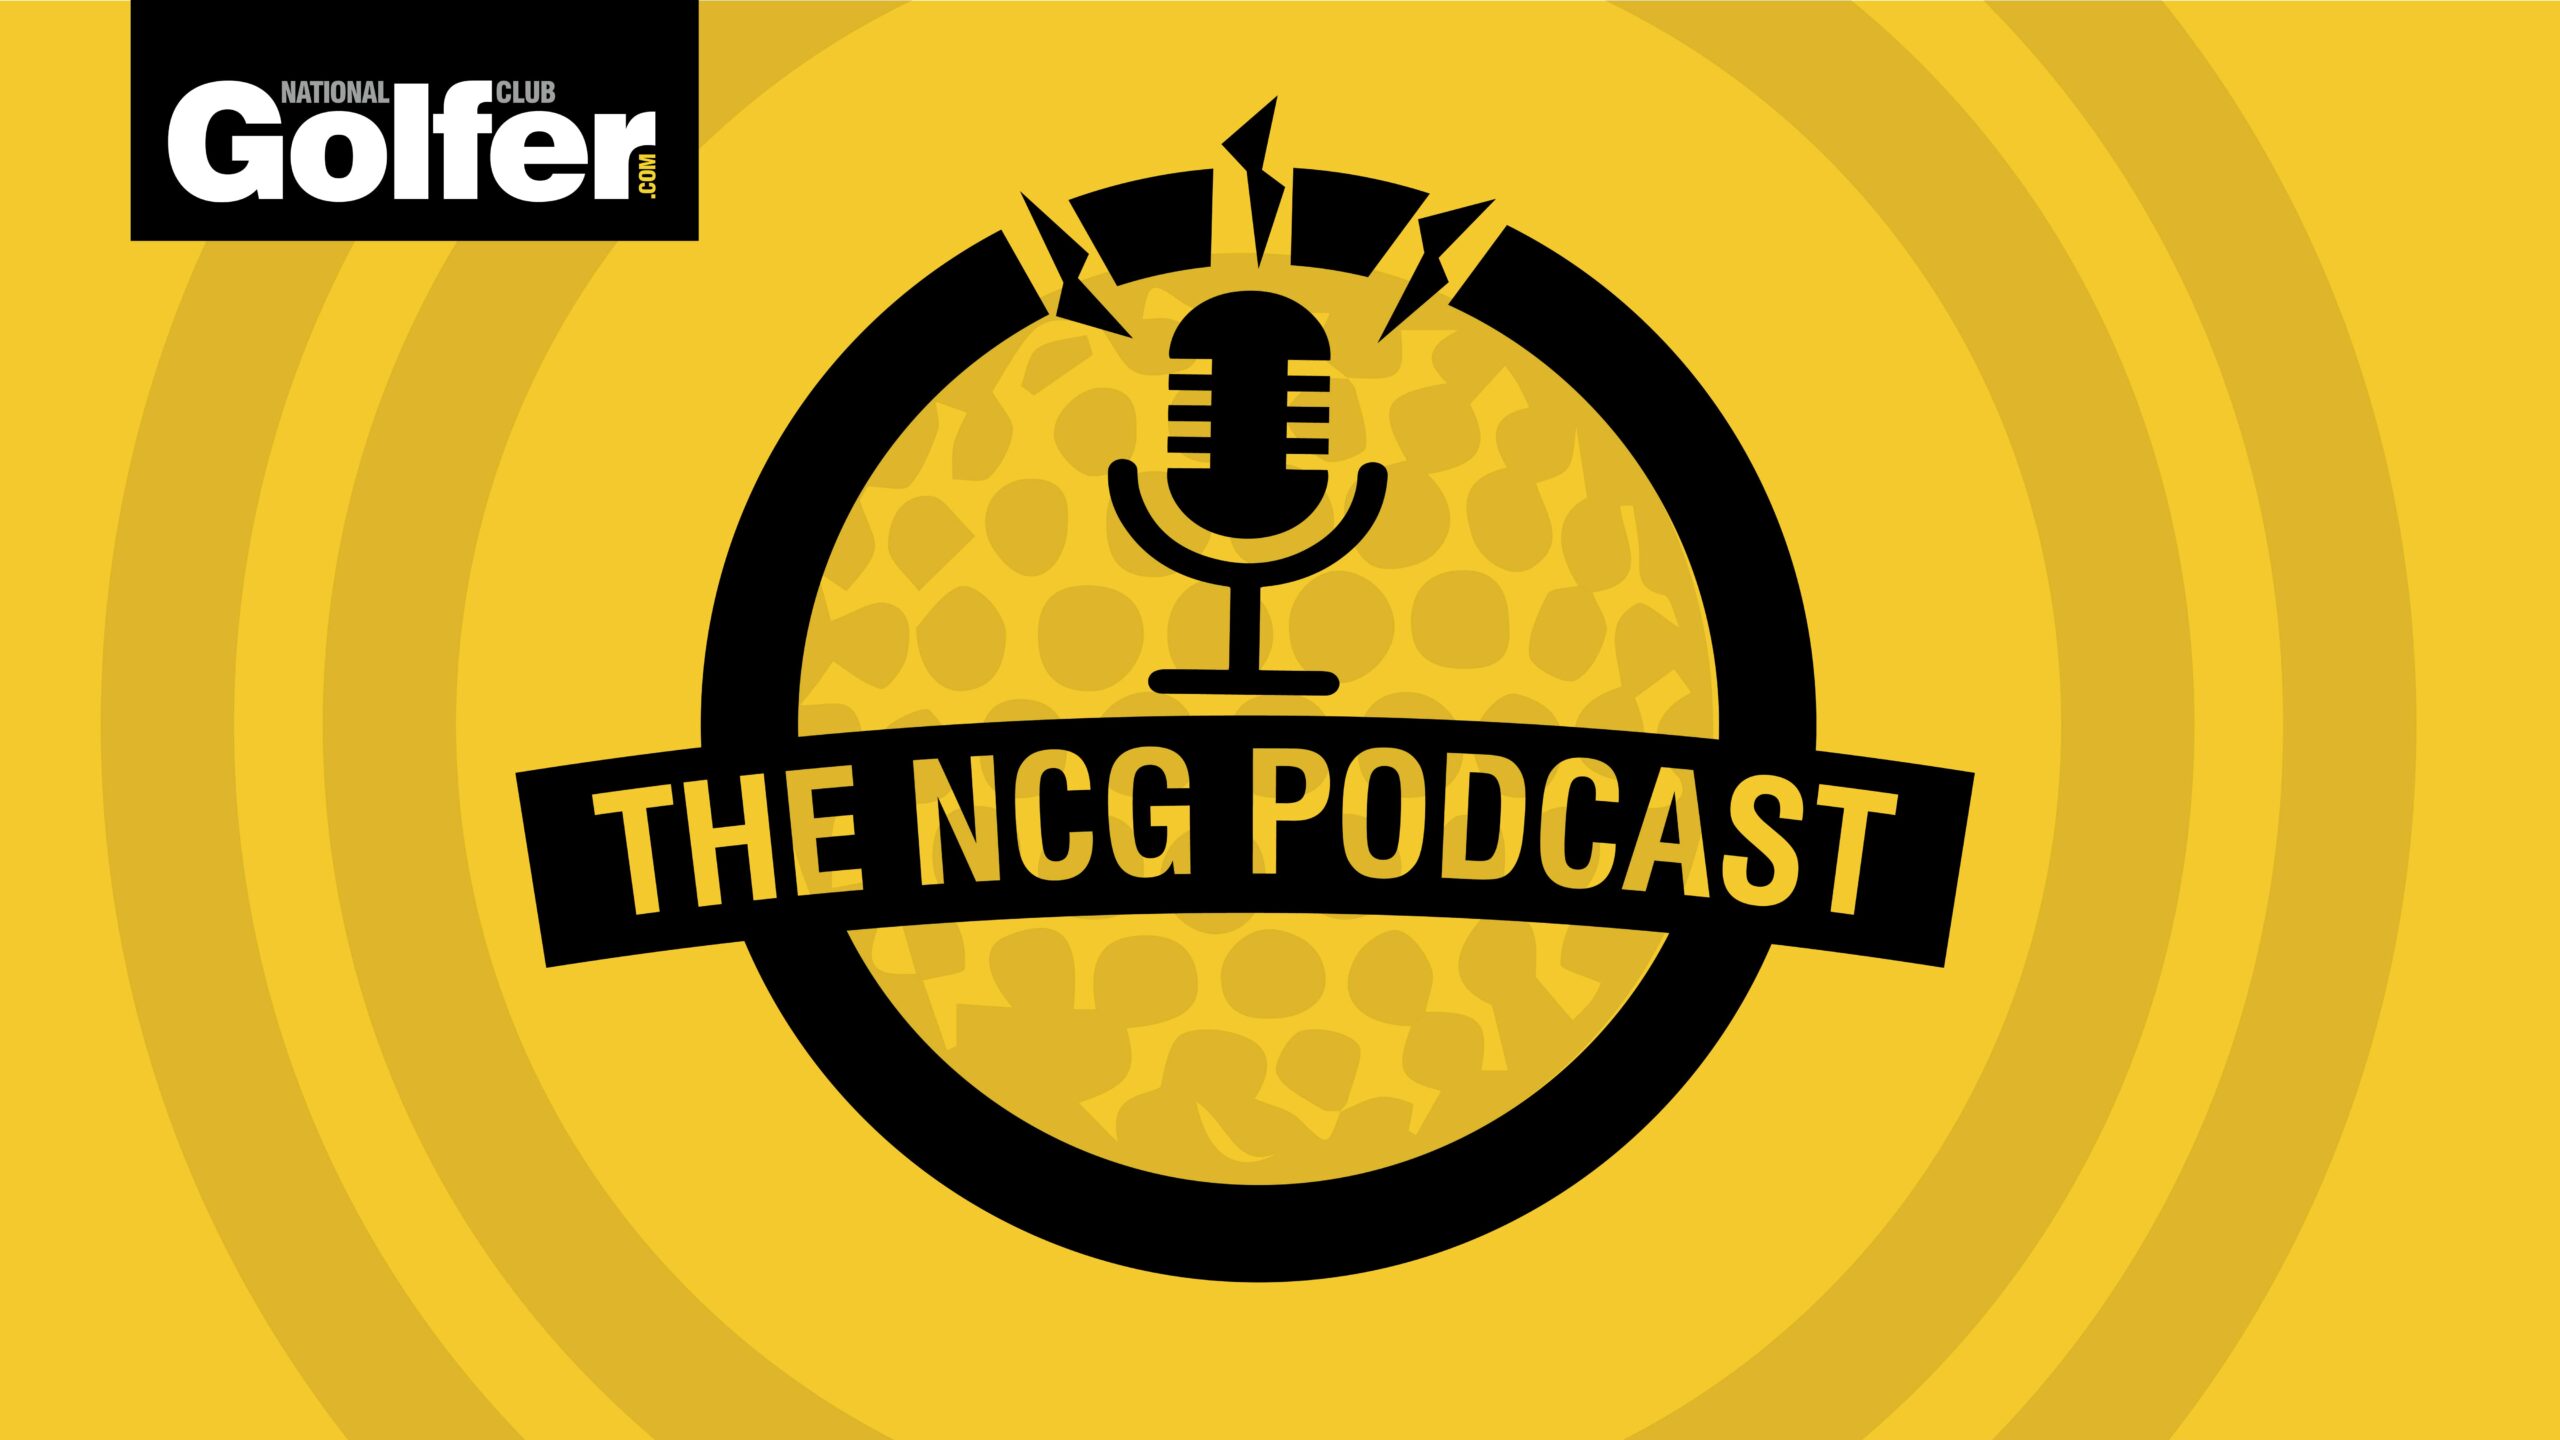 The NCG Podcast: Why are golf courses obsessed with being difficult?